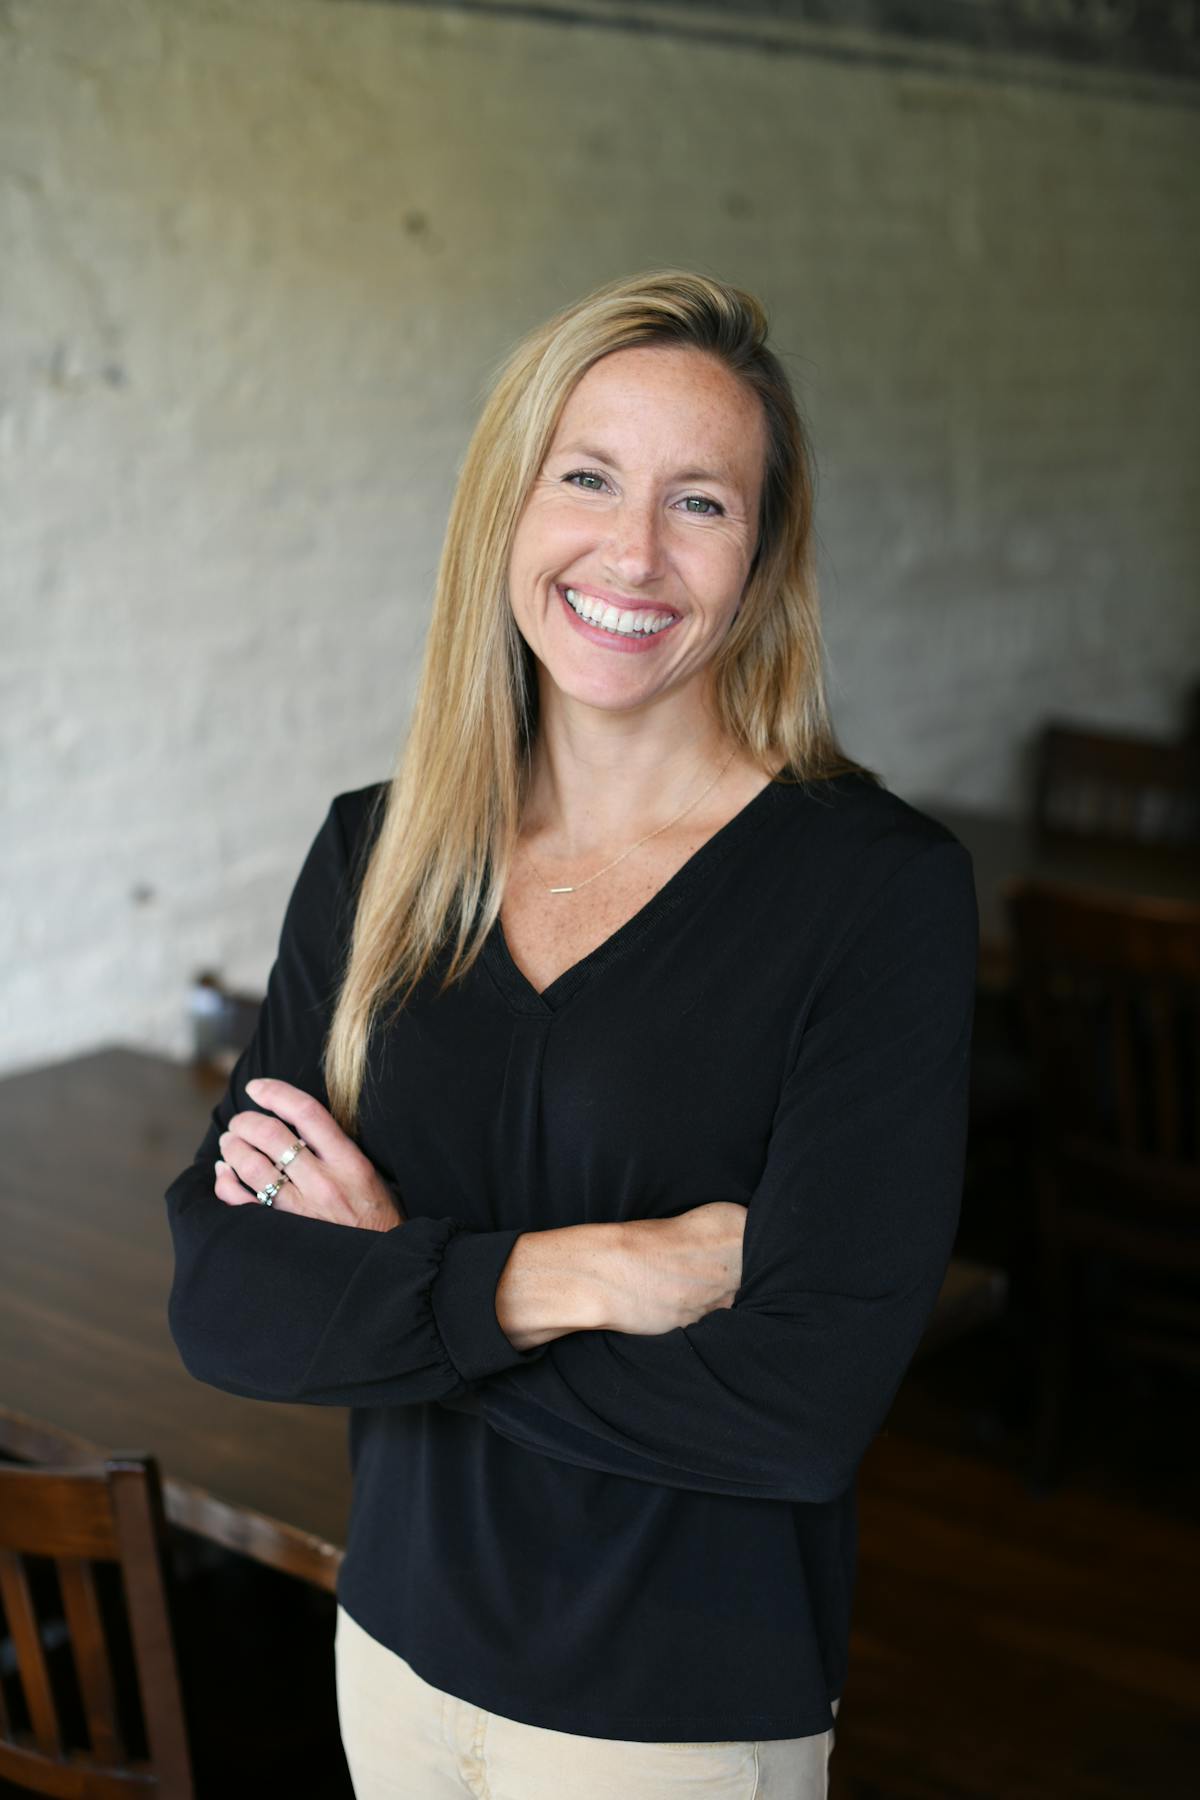 Jenny Jurkowski, Event Manager at The Coopers Tavern